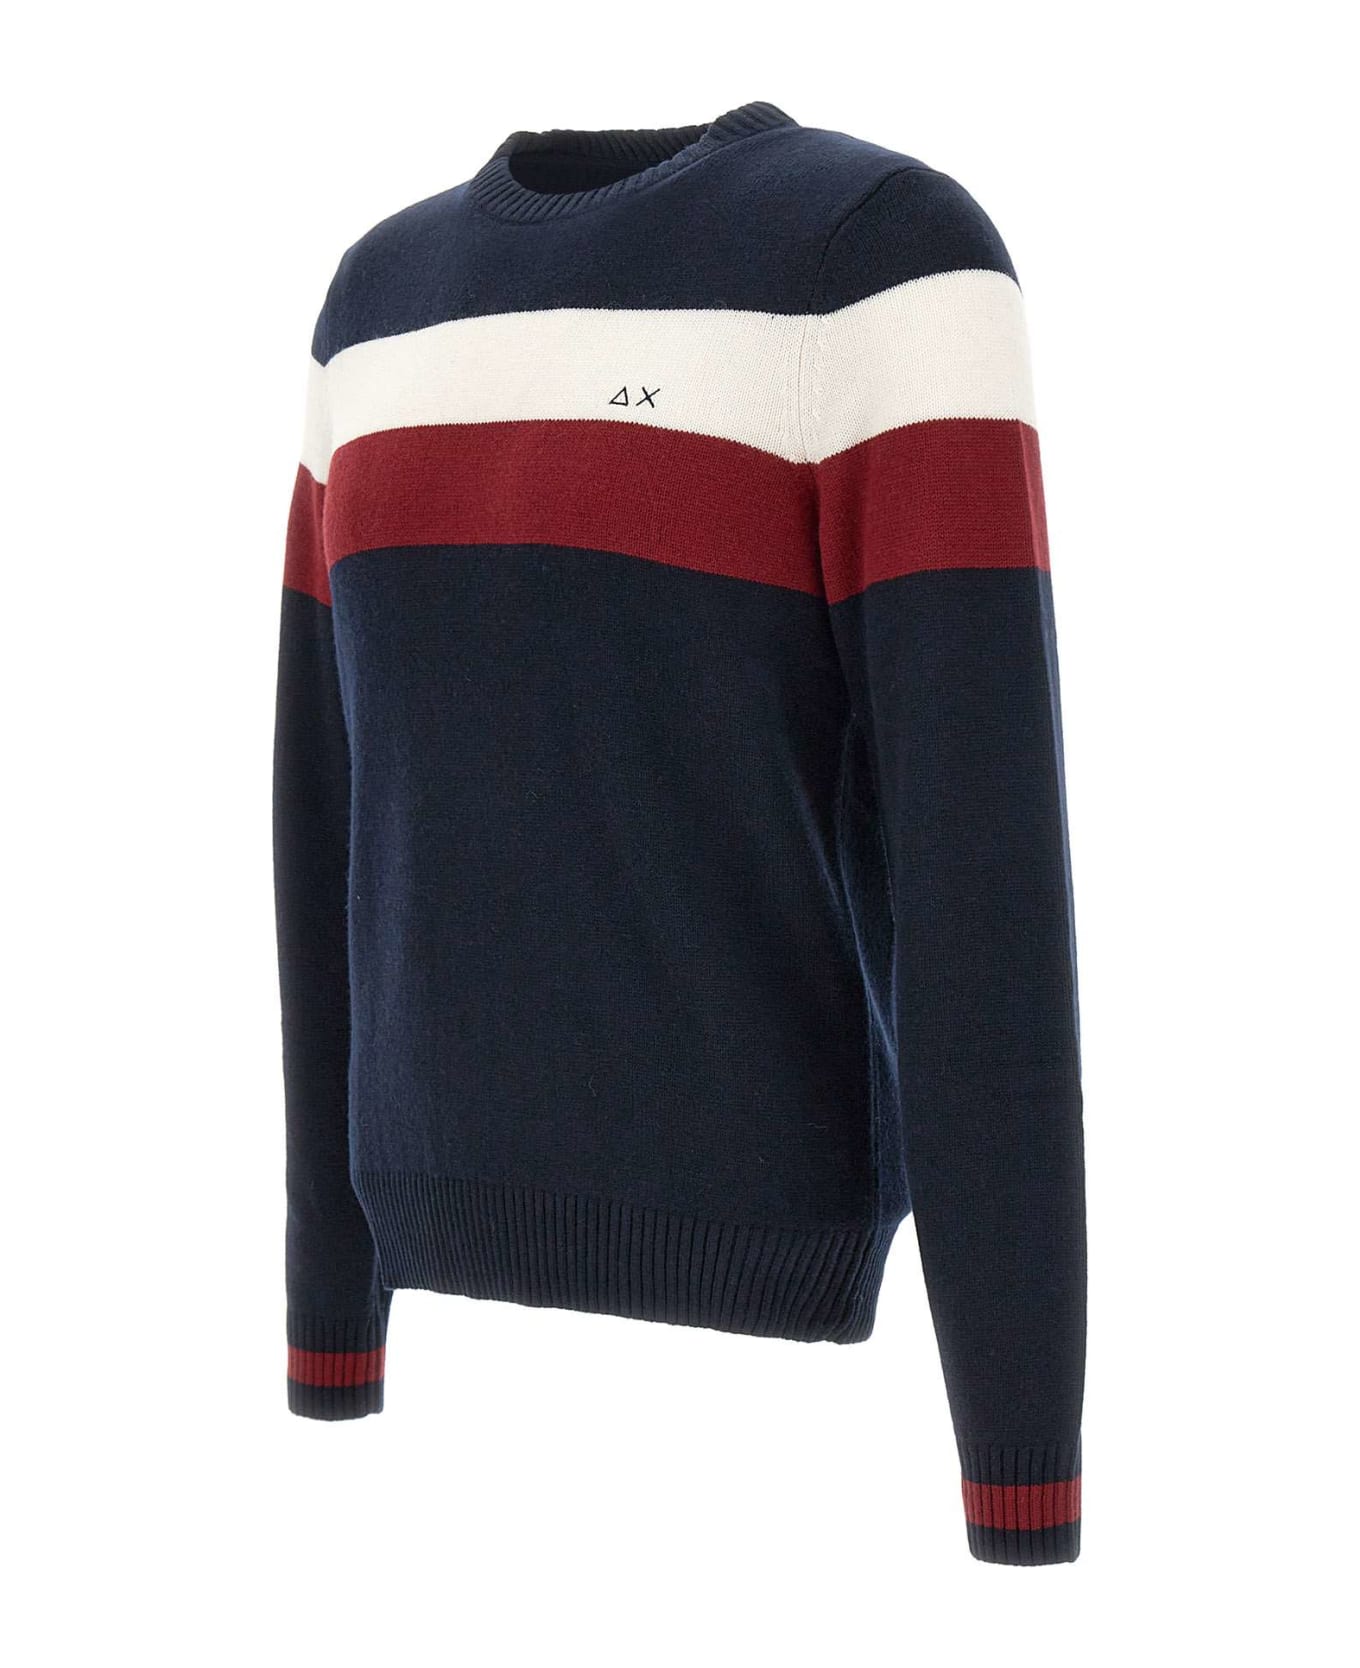 Sun 68 'fancy'wool, Viscose And Cashmere Sweater Sweater - NAVY BLUE